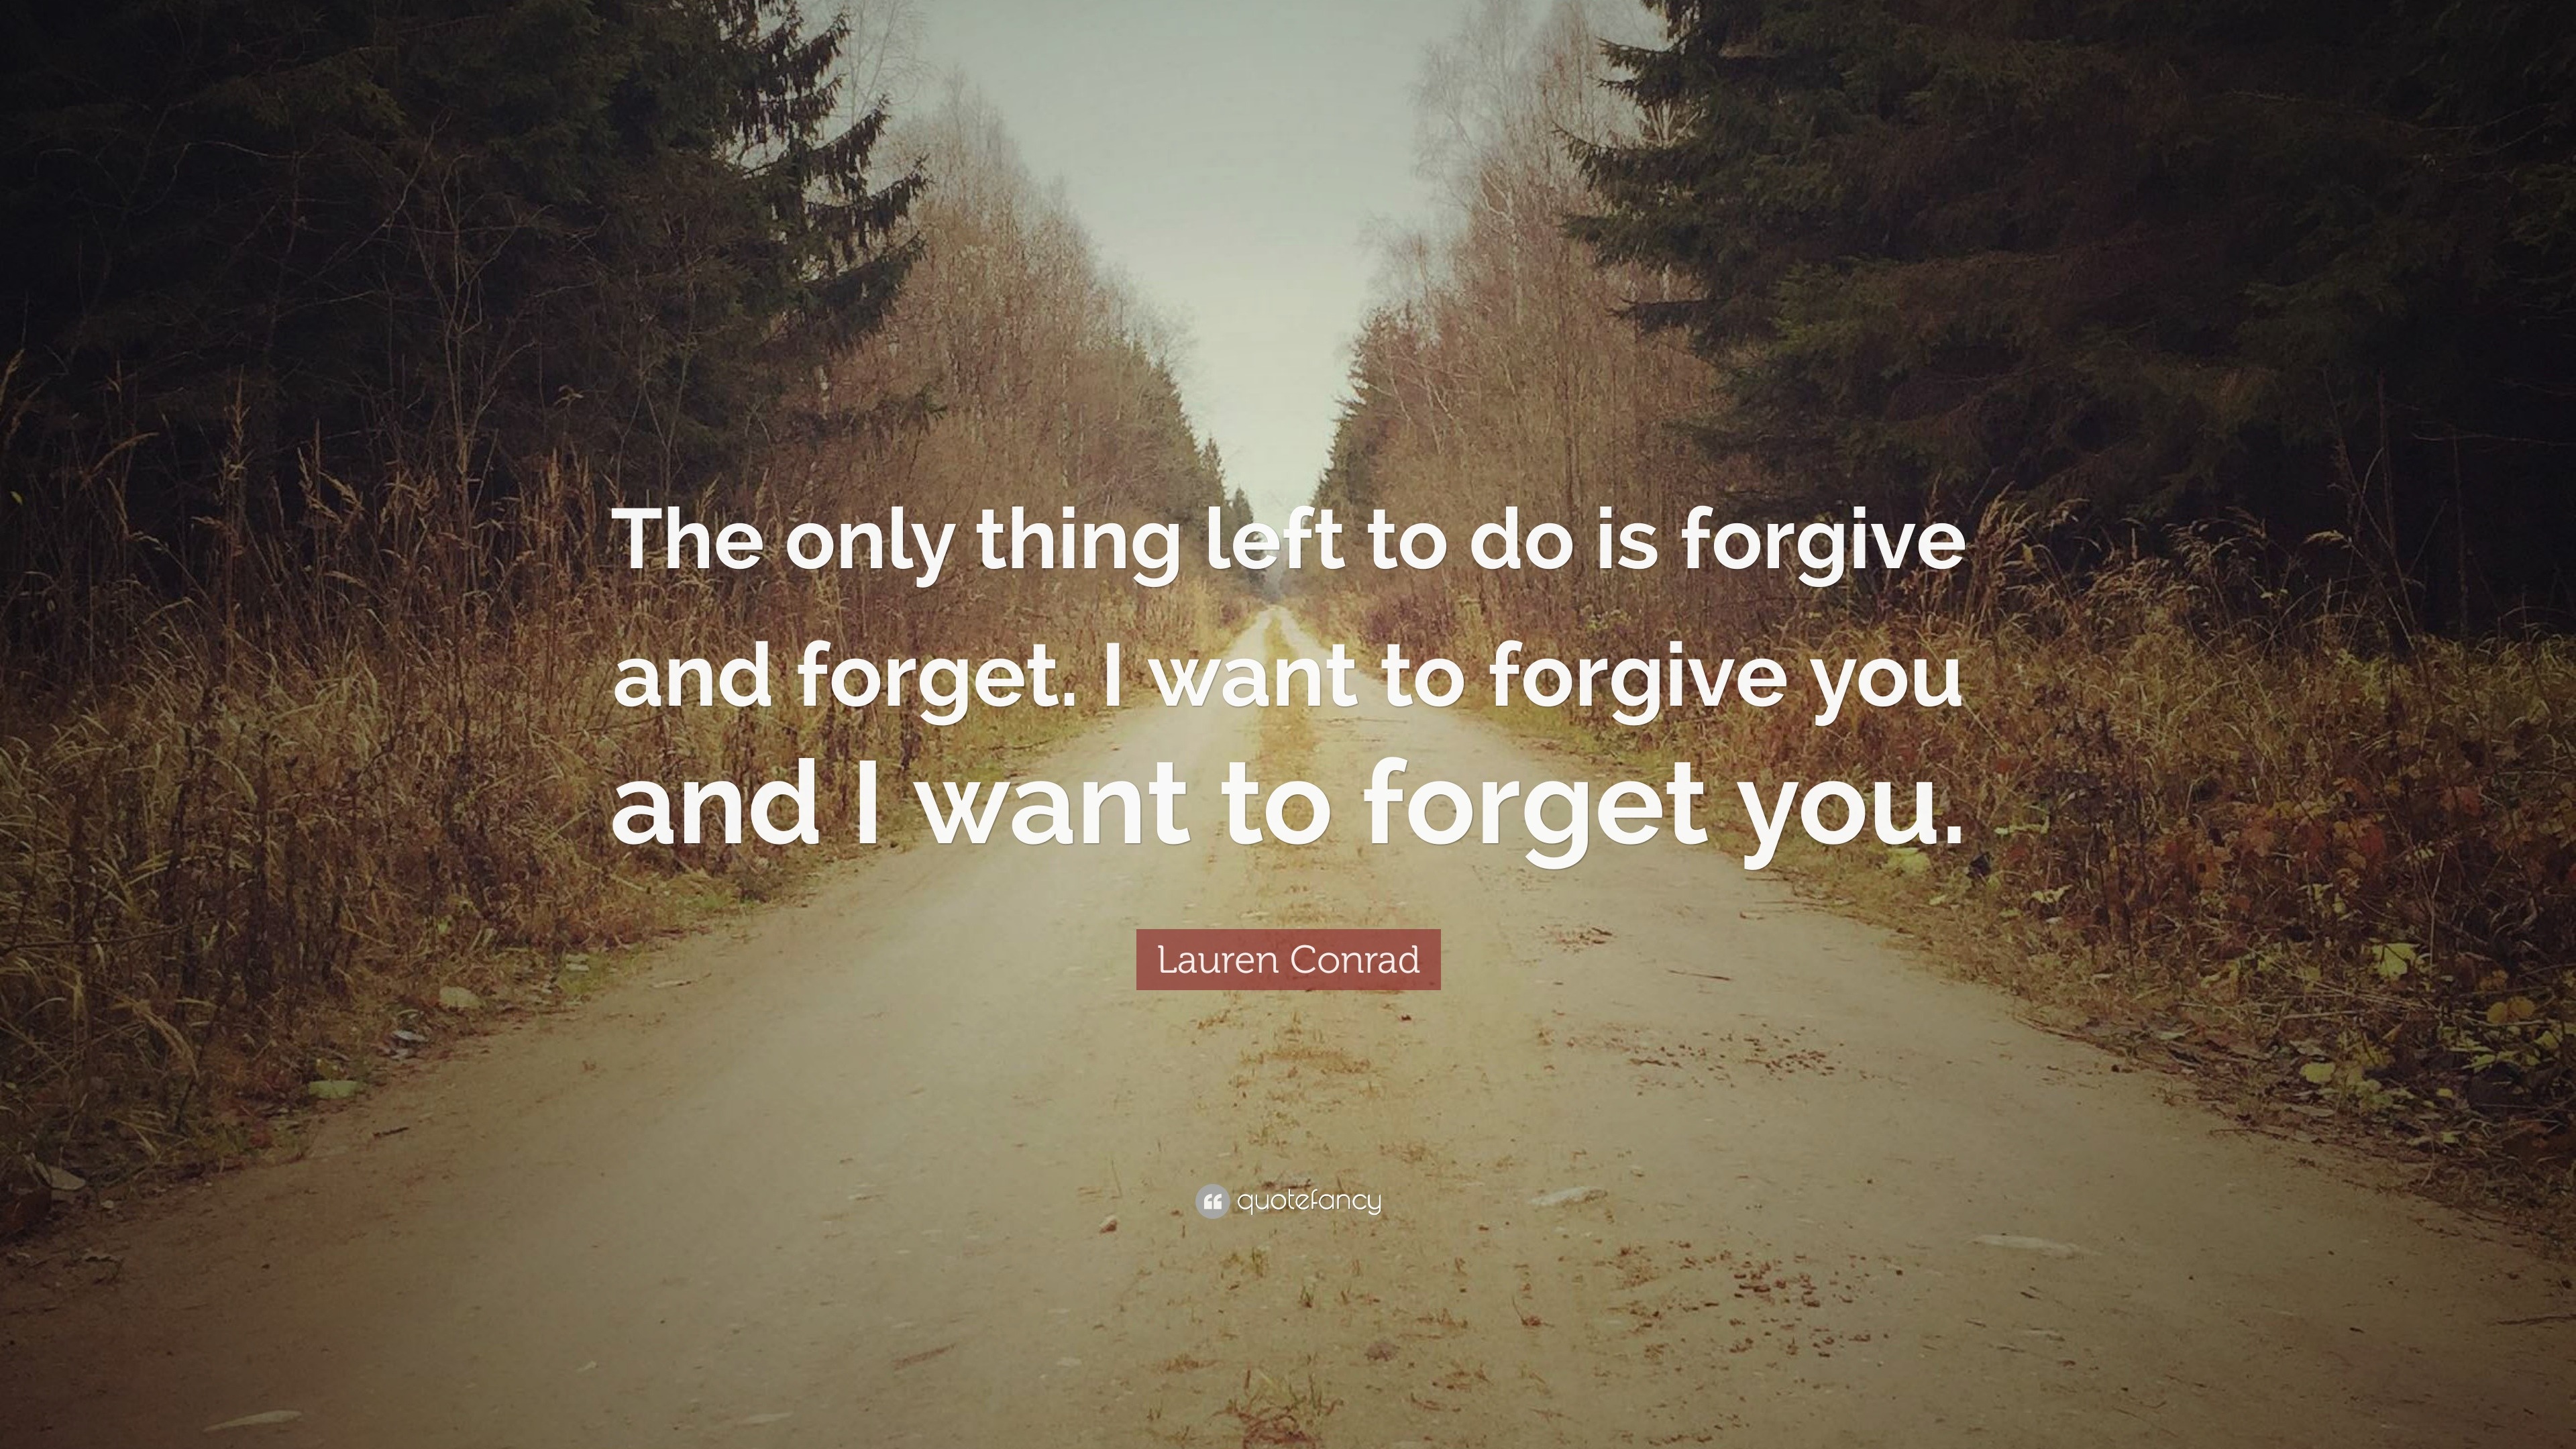 Lauren Conrad Quote: “The Only Thing Left To Do Is Forgive And Forget. I Want To